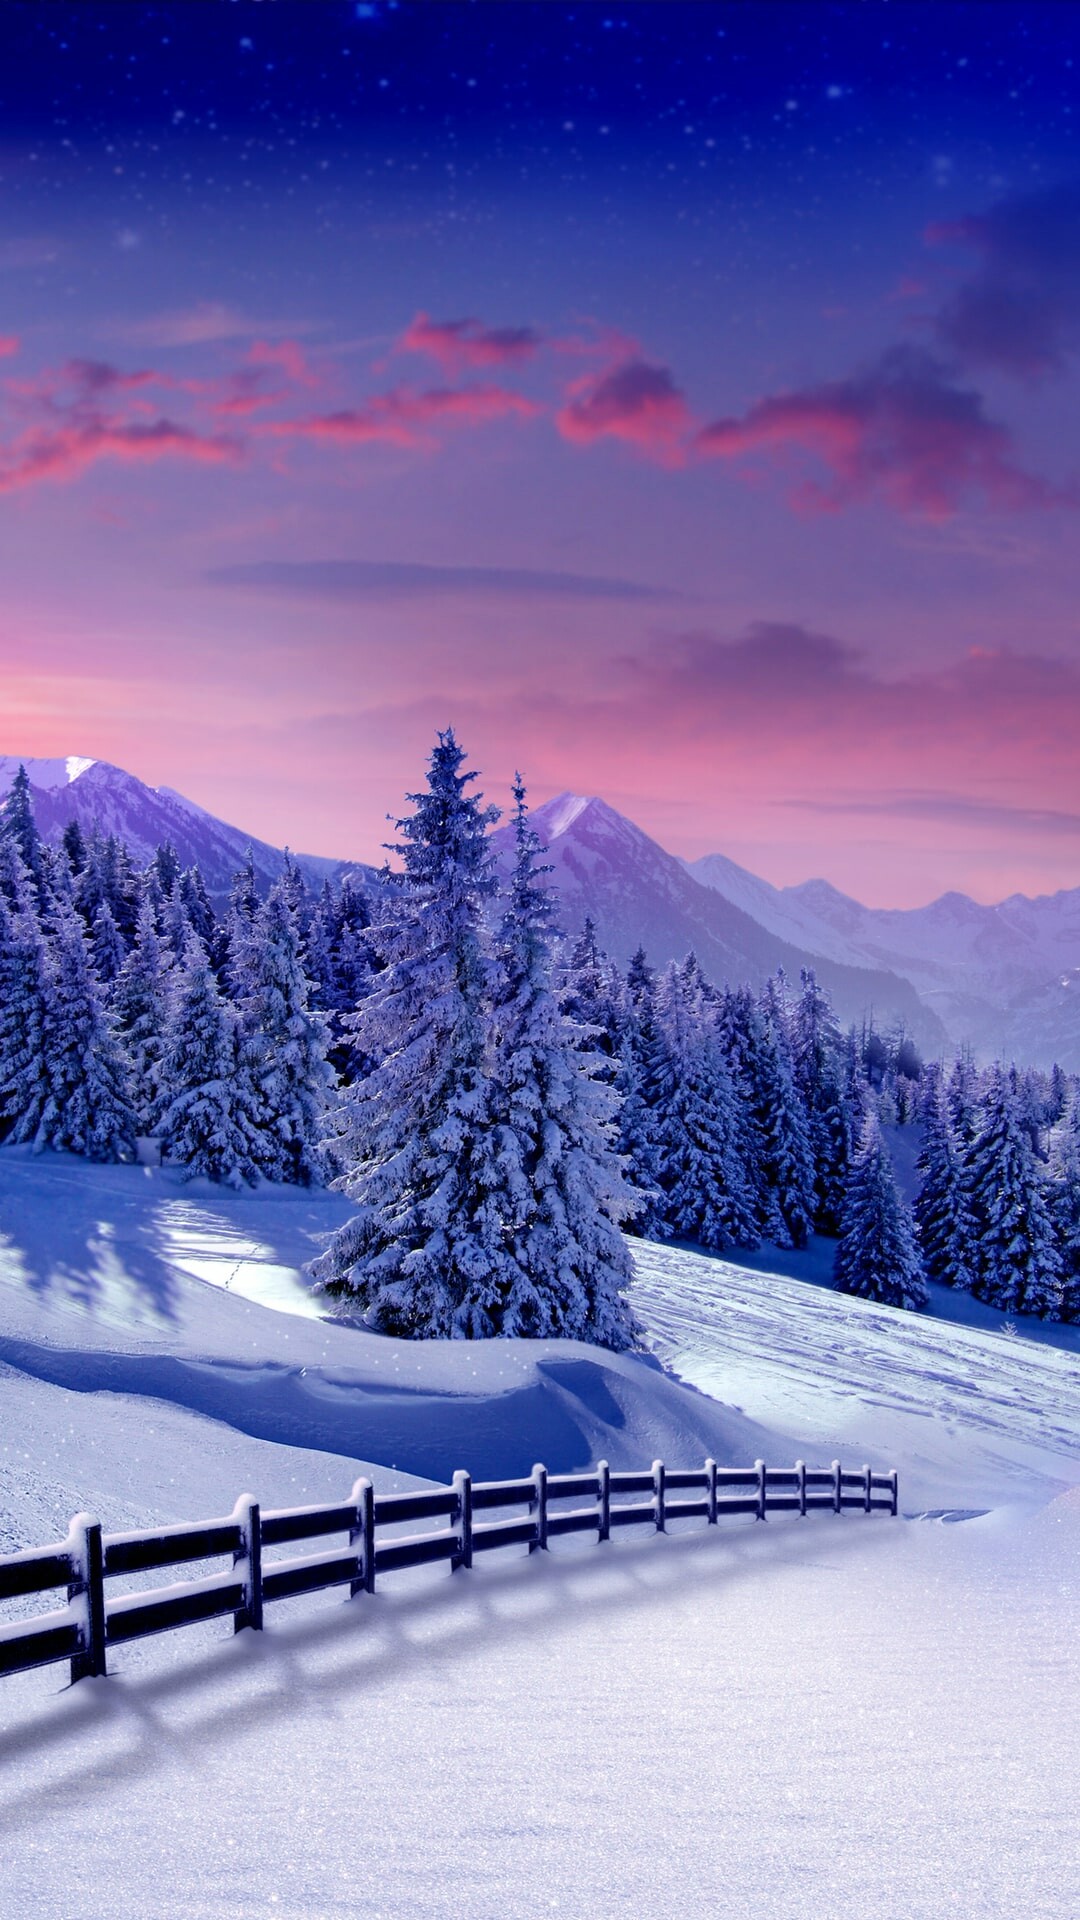 Winter: One of the four seasons, Snowbound territories, Snowy pine. 1080x1920 Full HD Wallpaper.